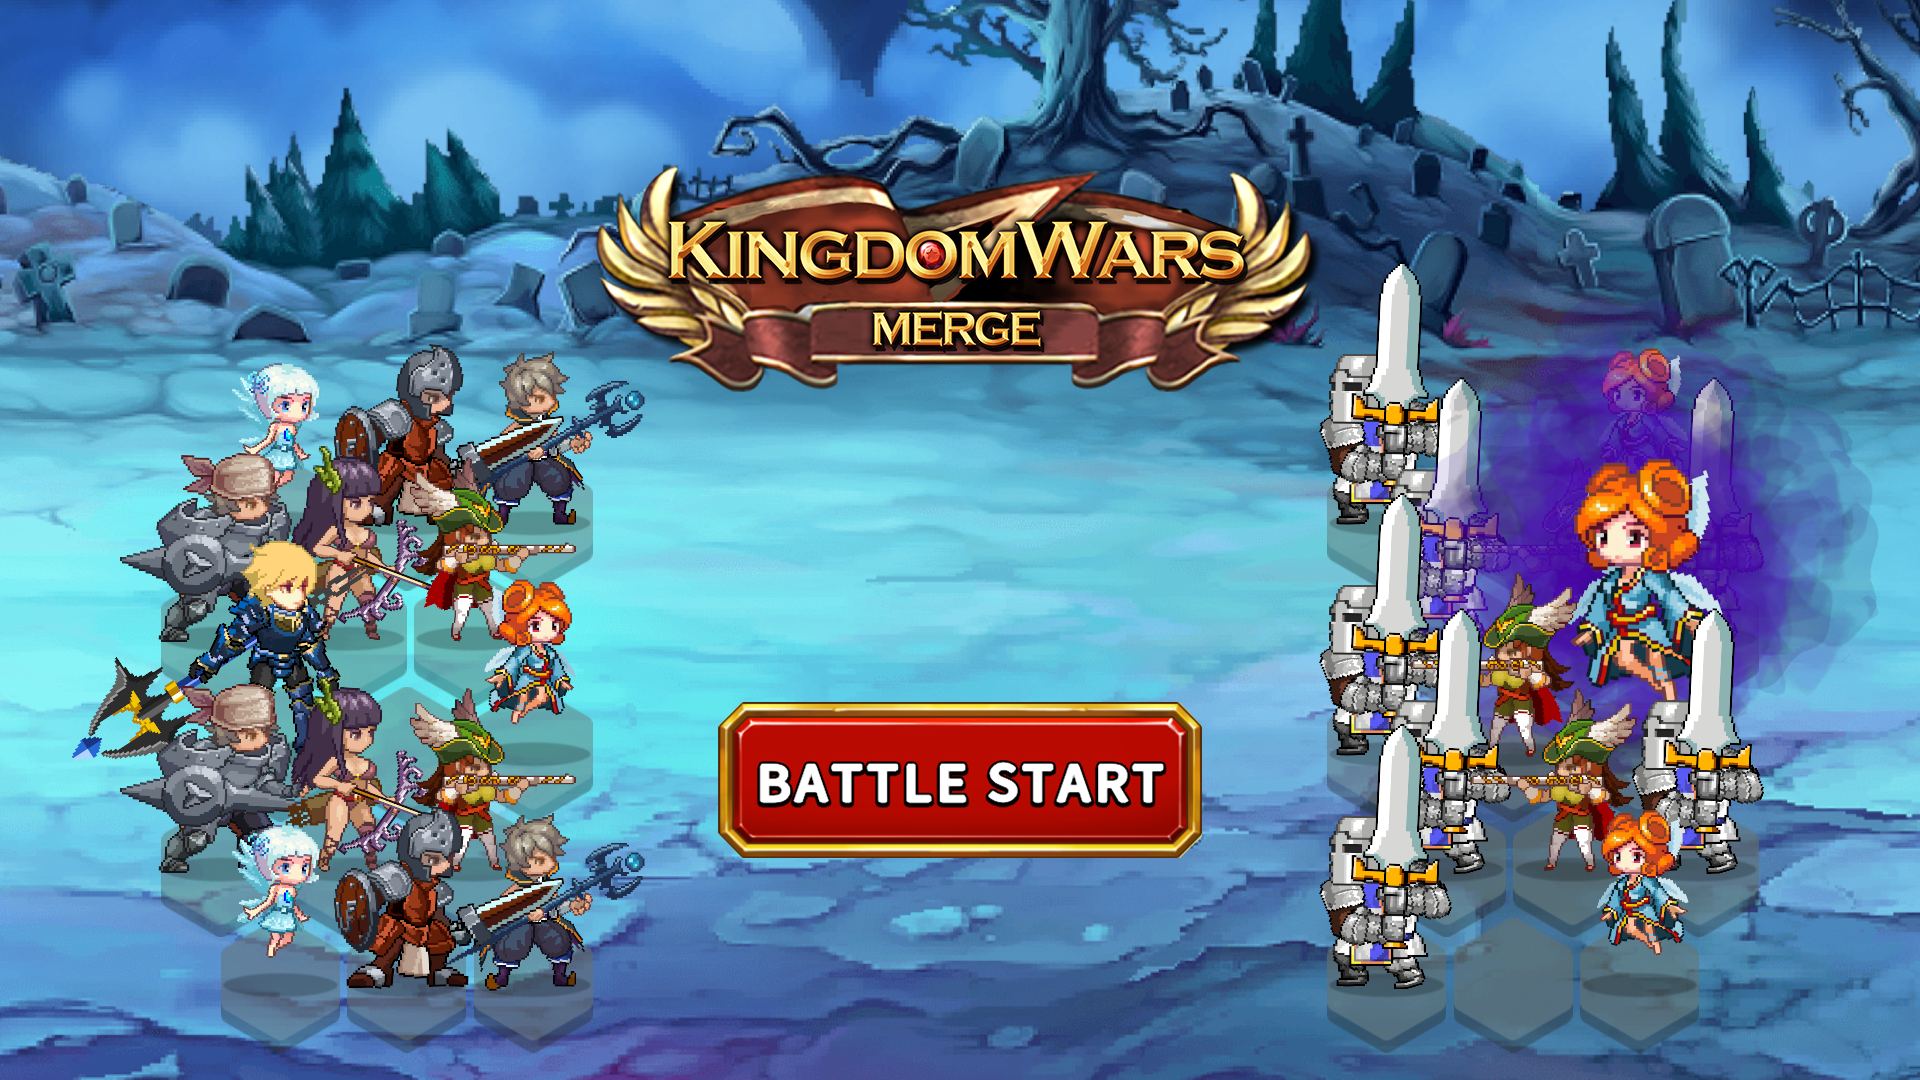 Play Kingdom Guard:Tower Defense TD Online for Free on PC & Mobile